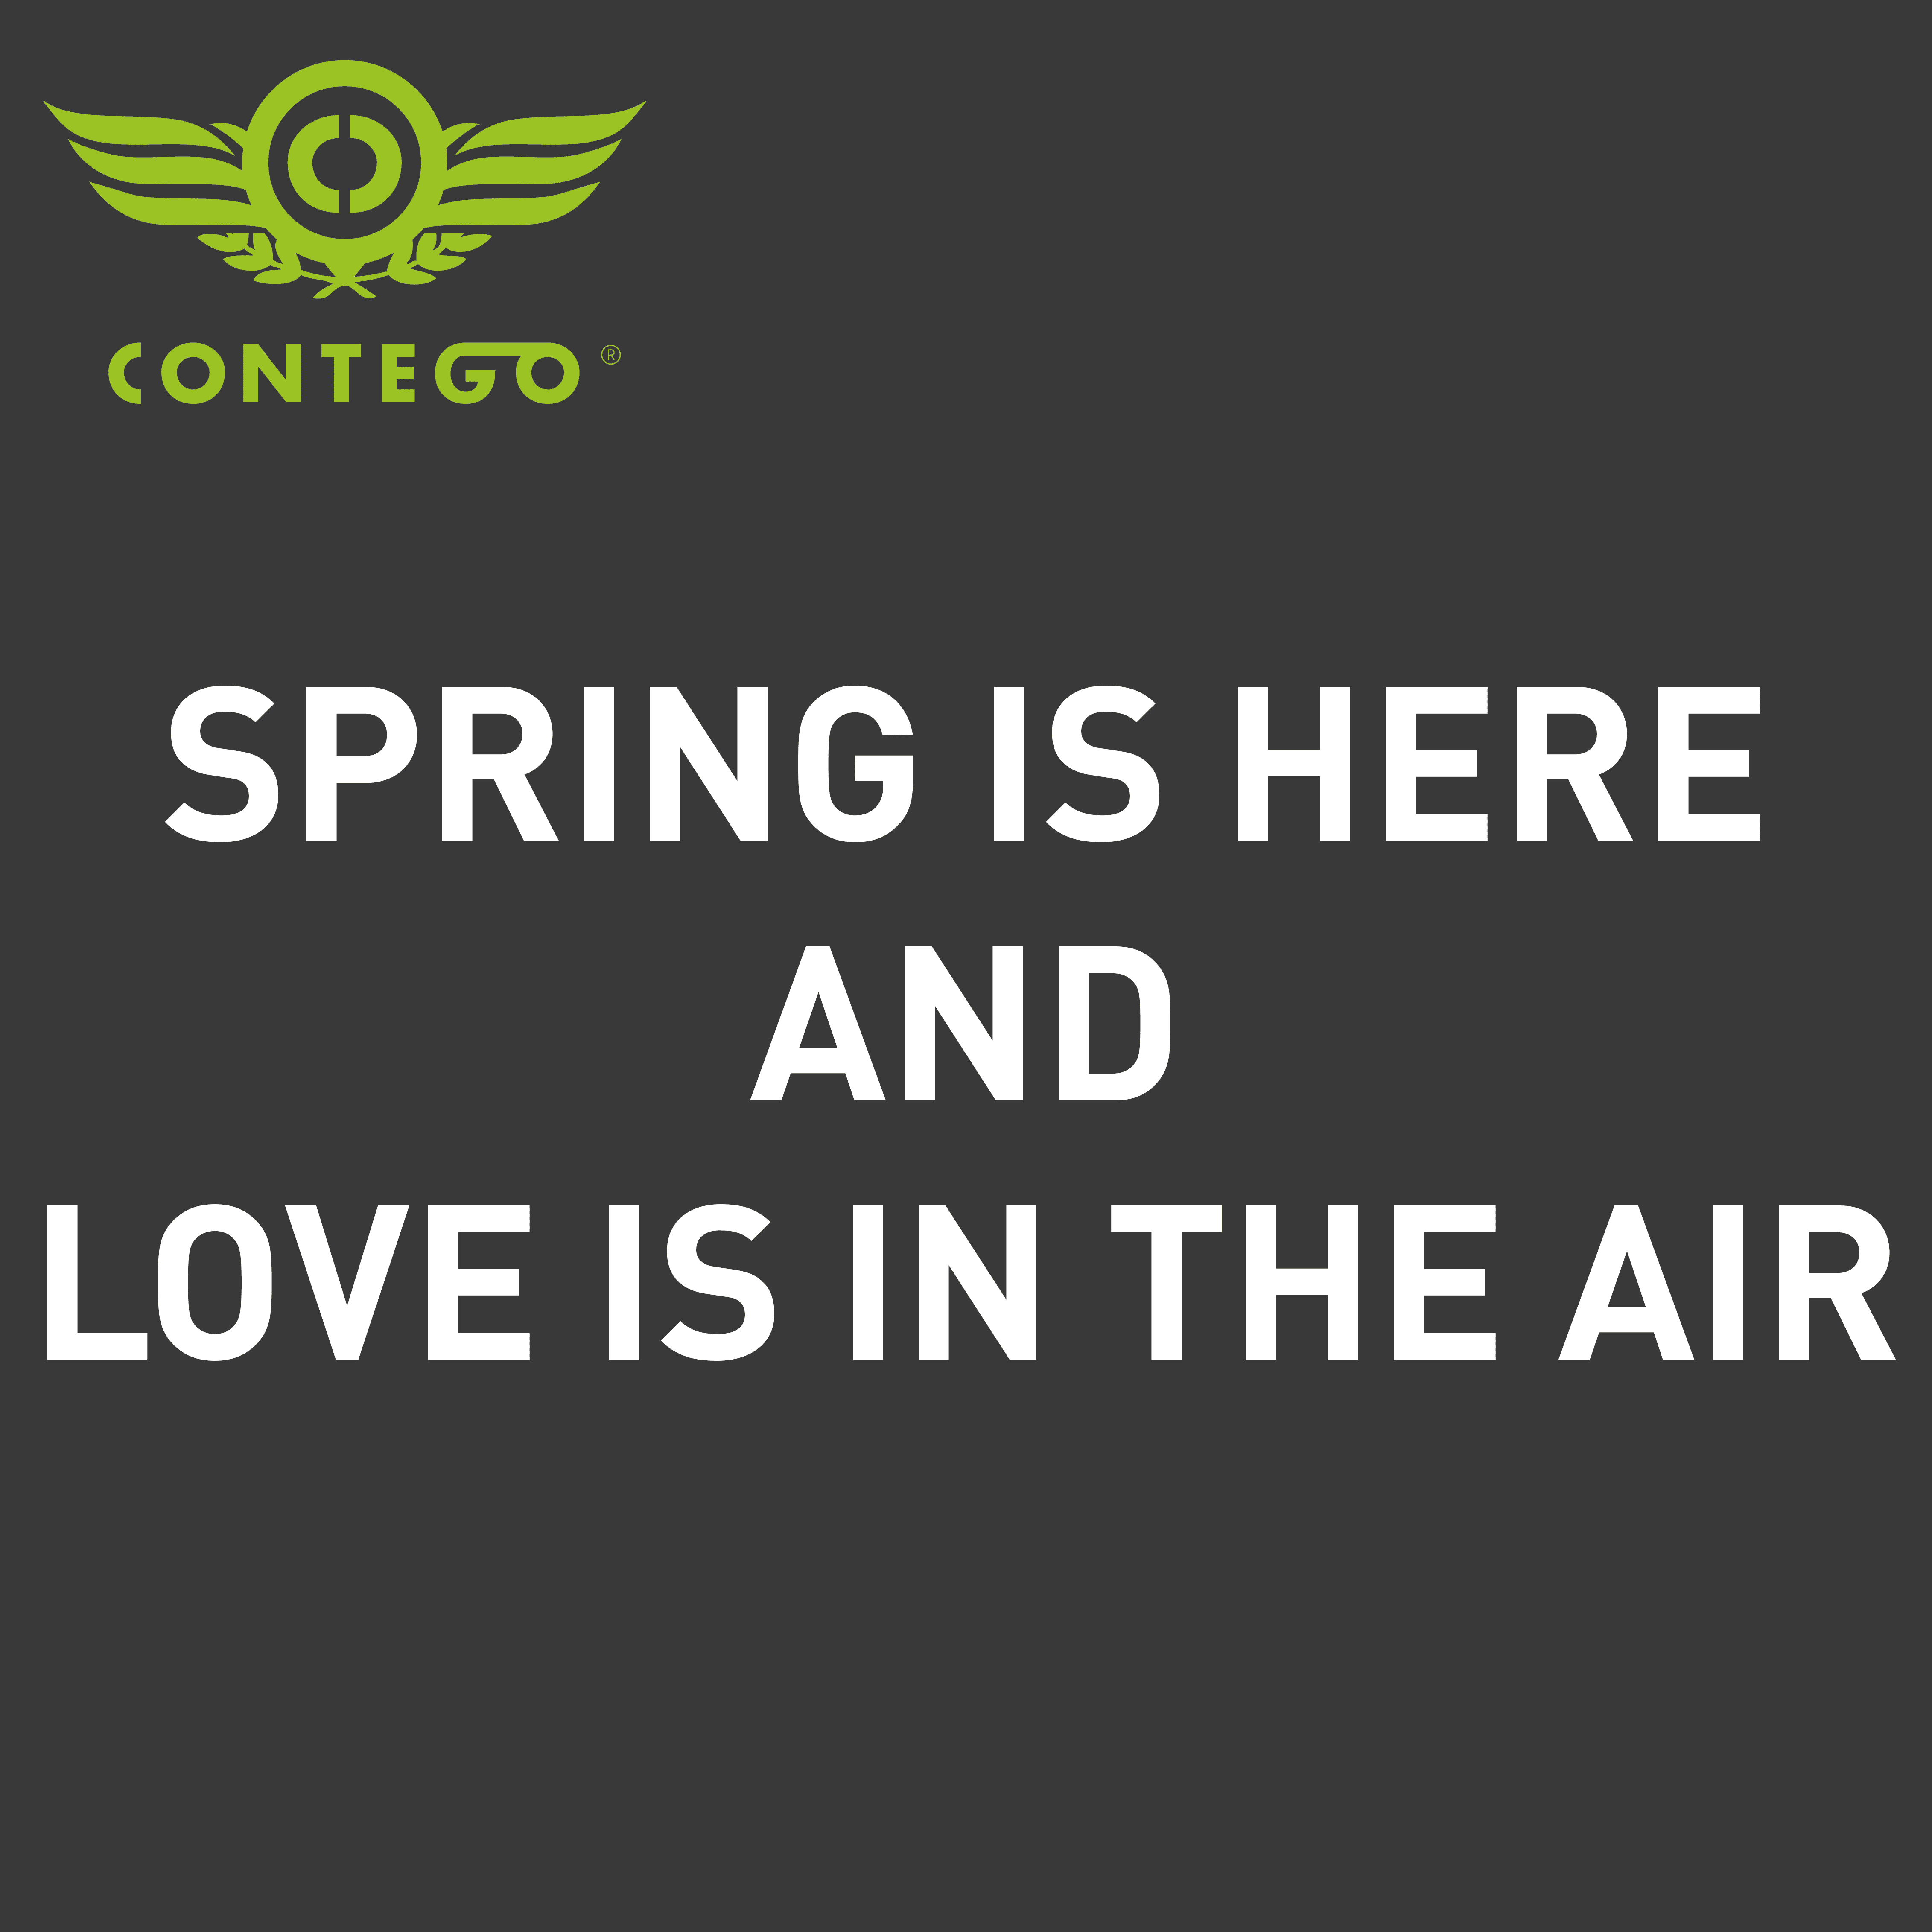 Spring is here and love is in the air